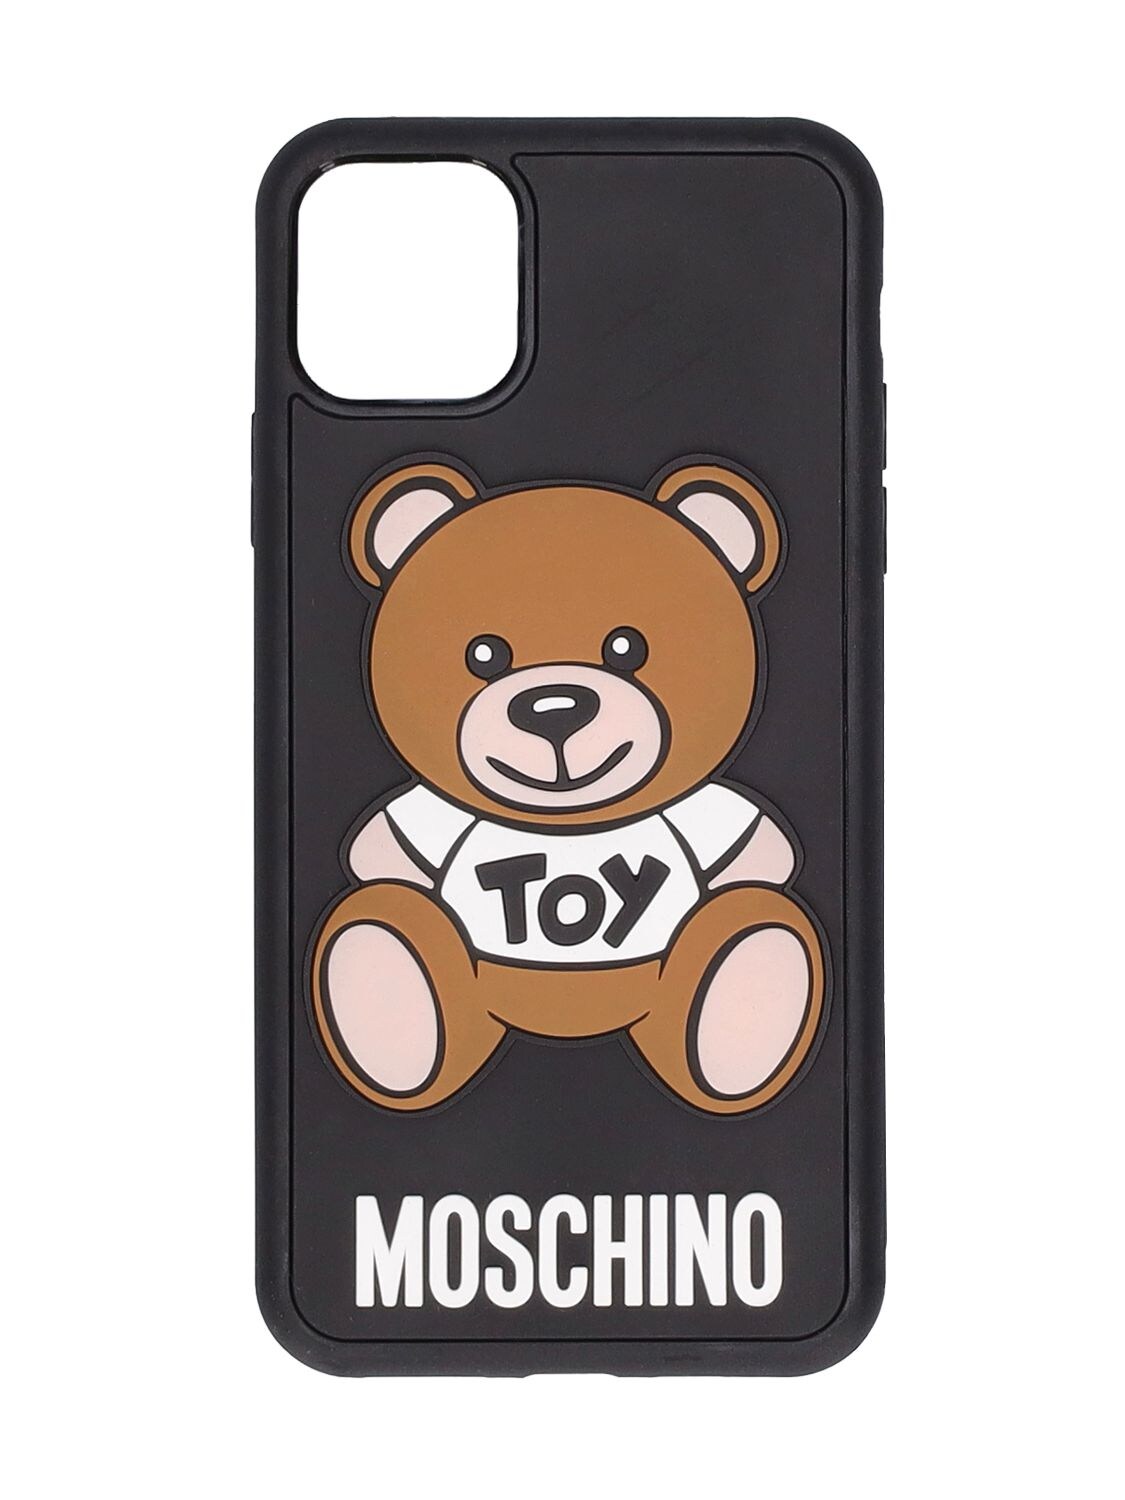 MOSCHINO Teddy Toy Iphone 11 Pro Max Case